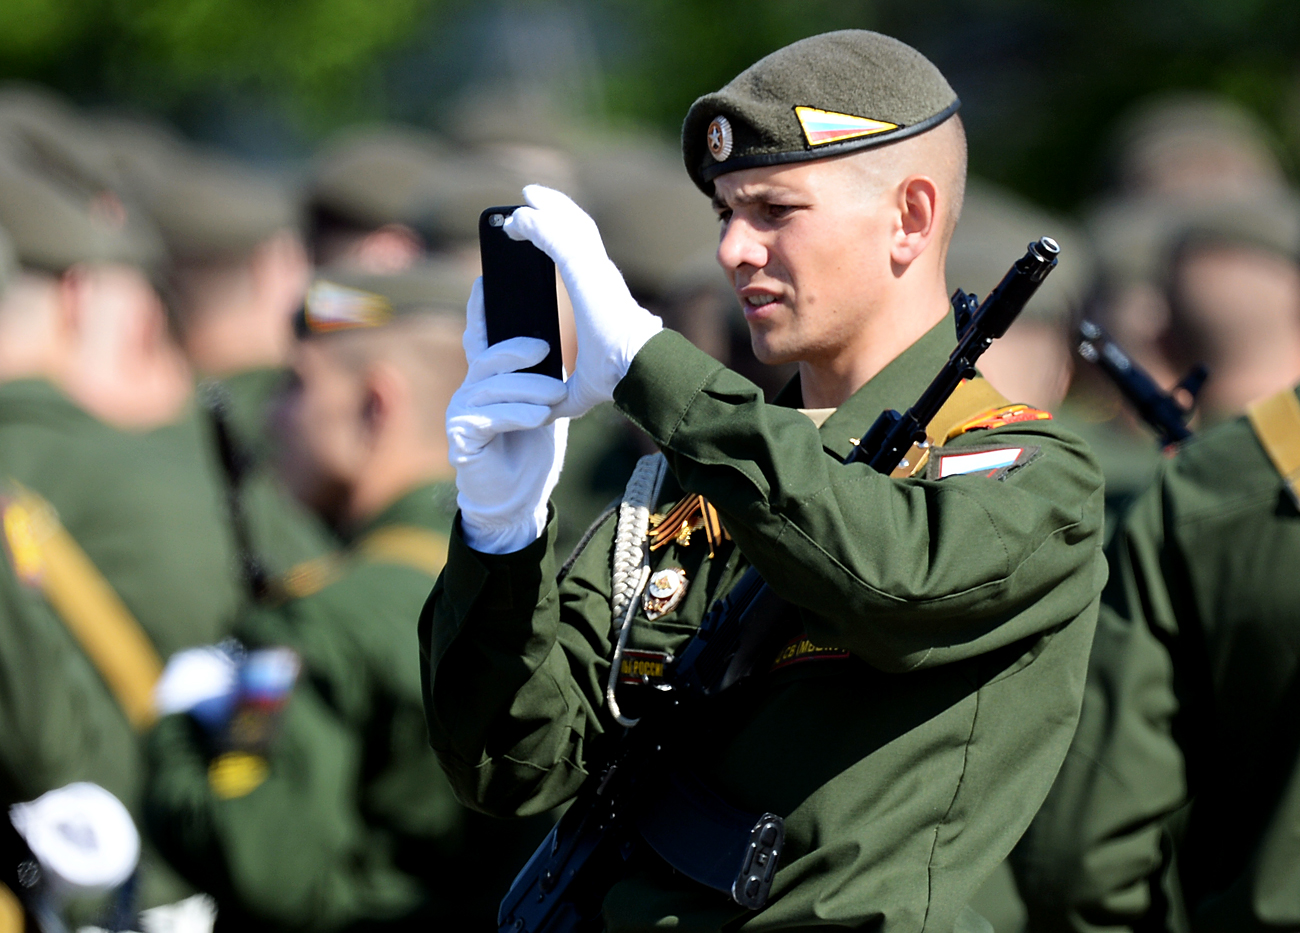 Psychologists find Russian army service great way to beat gadget addiction